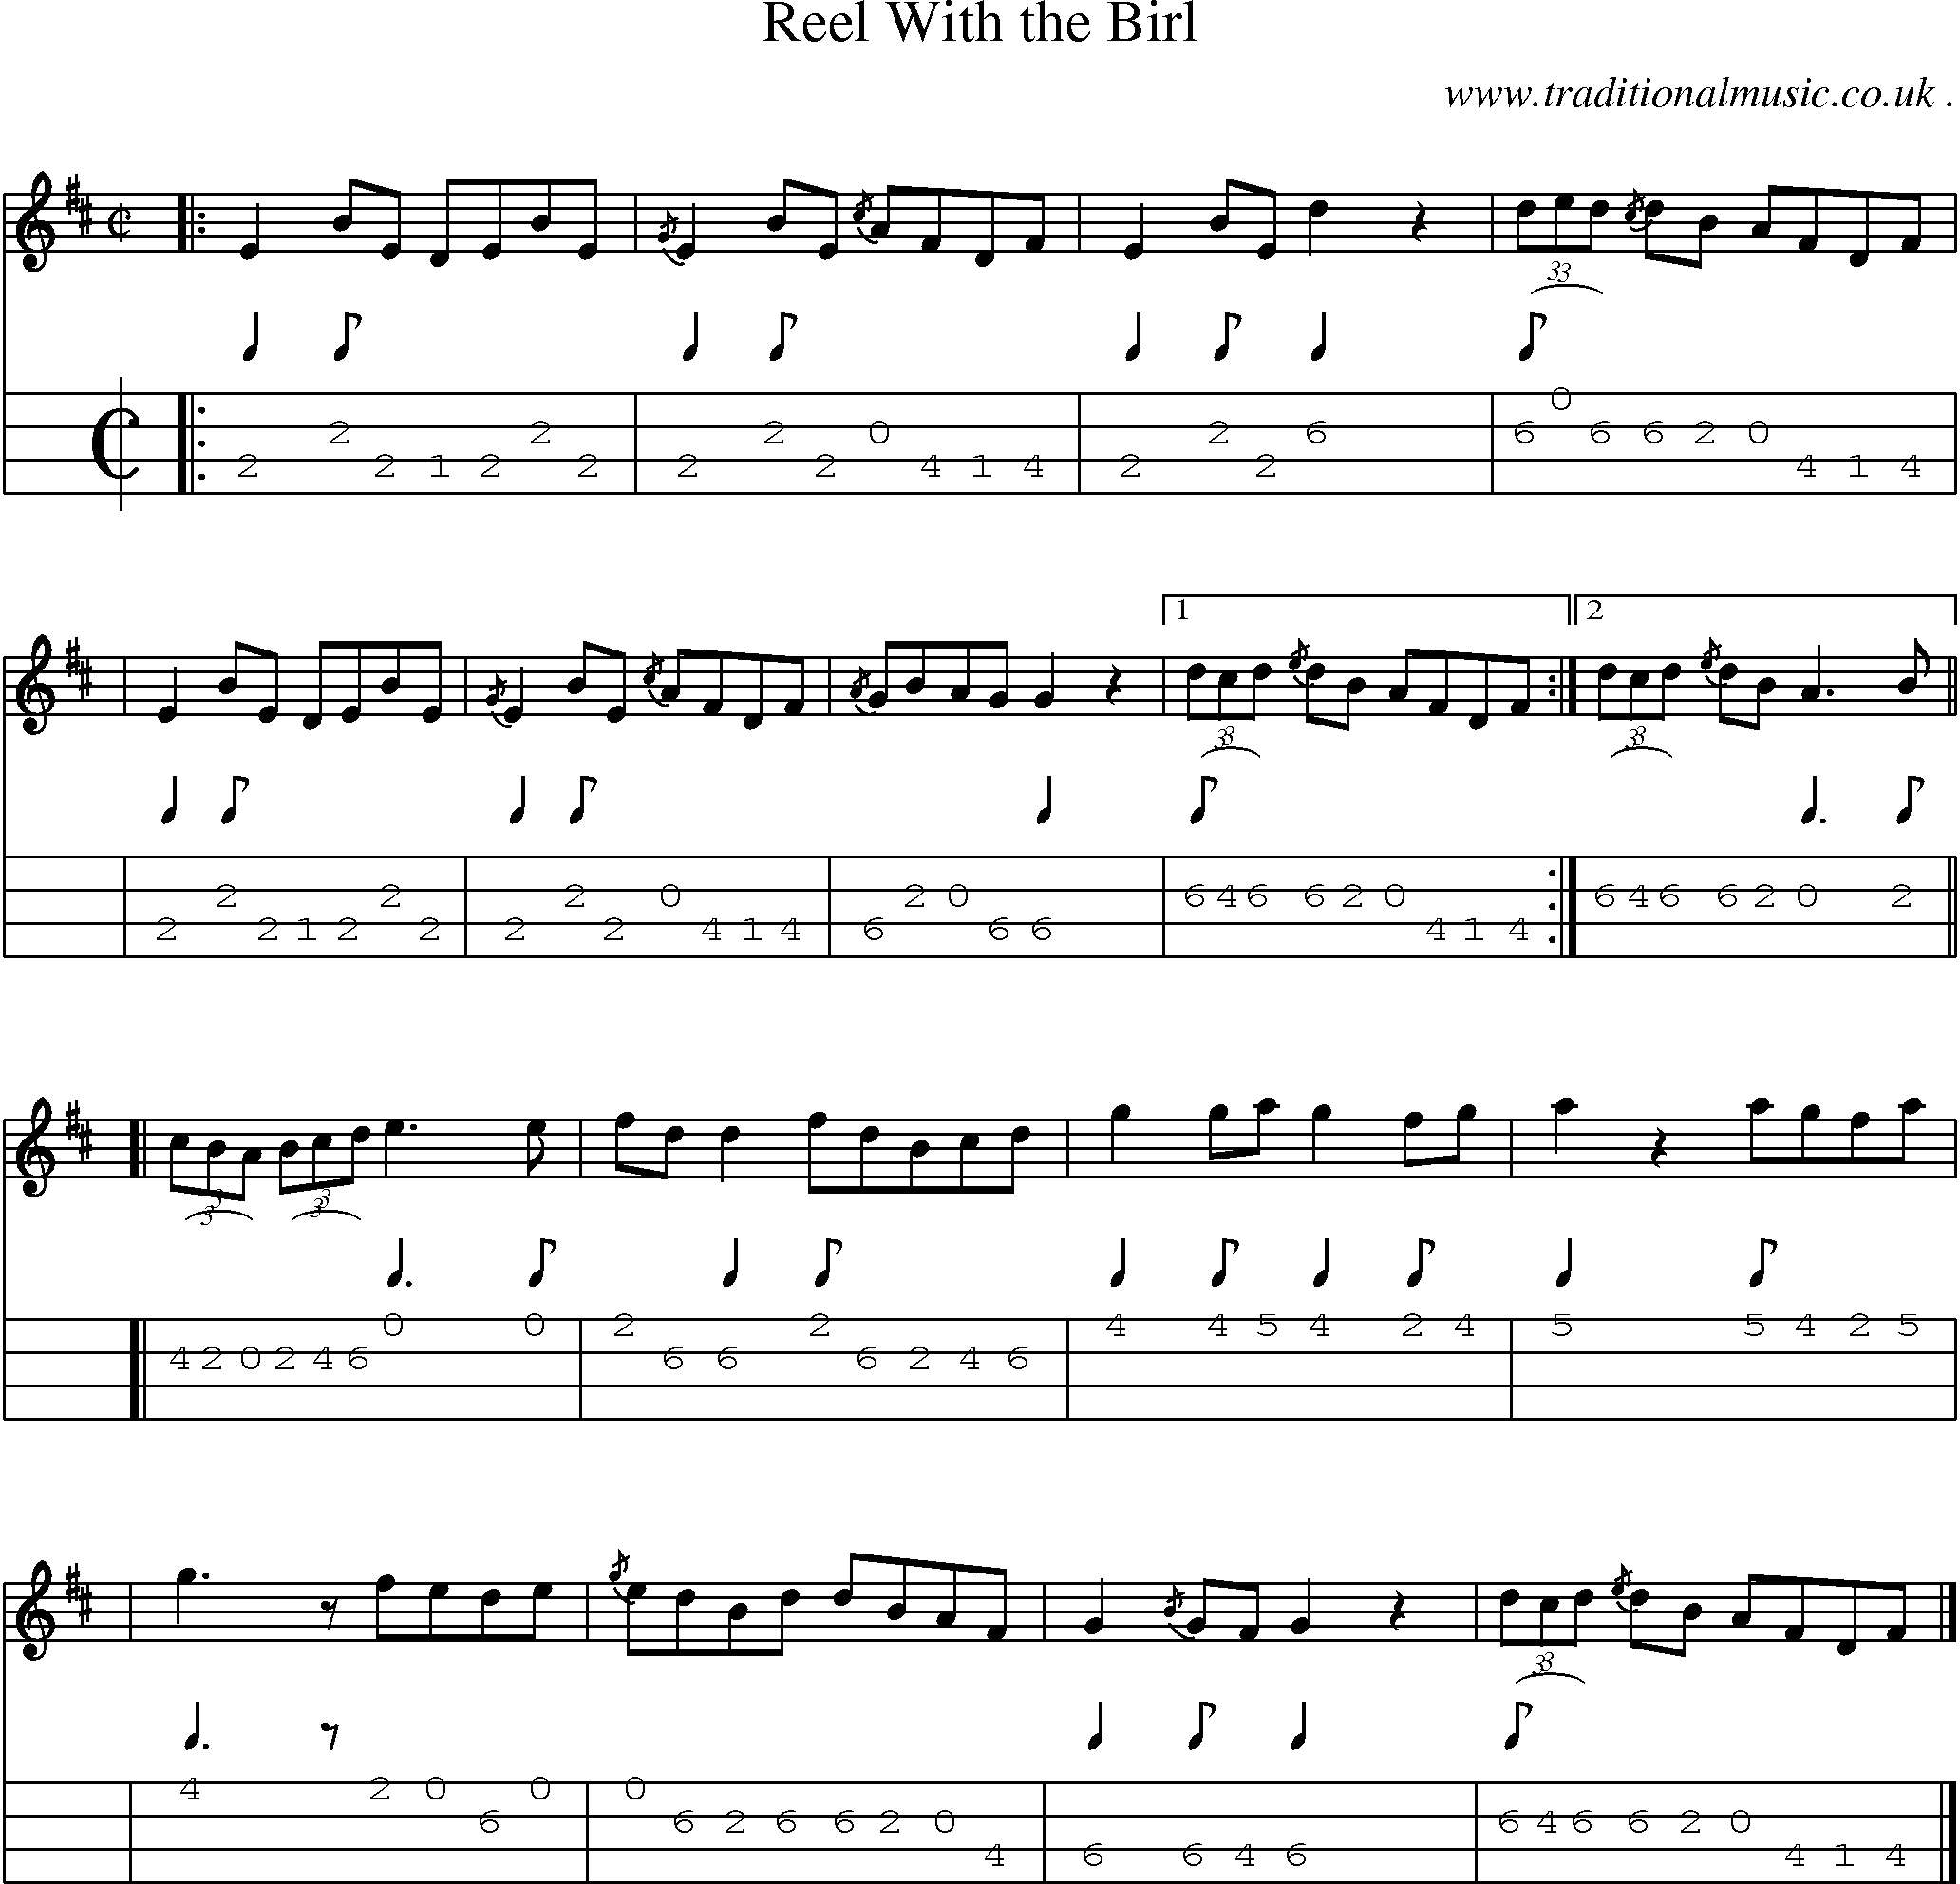 Sheet-music  score, Chords and Mandolin Tabs for Reel With The Birl